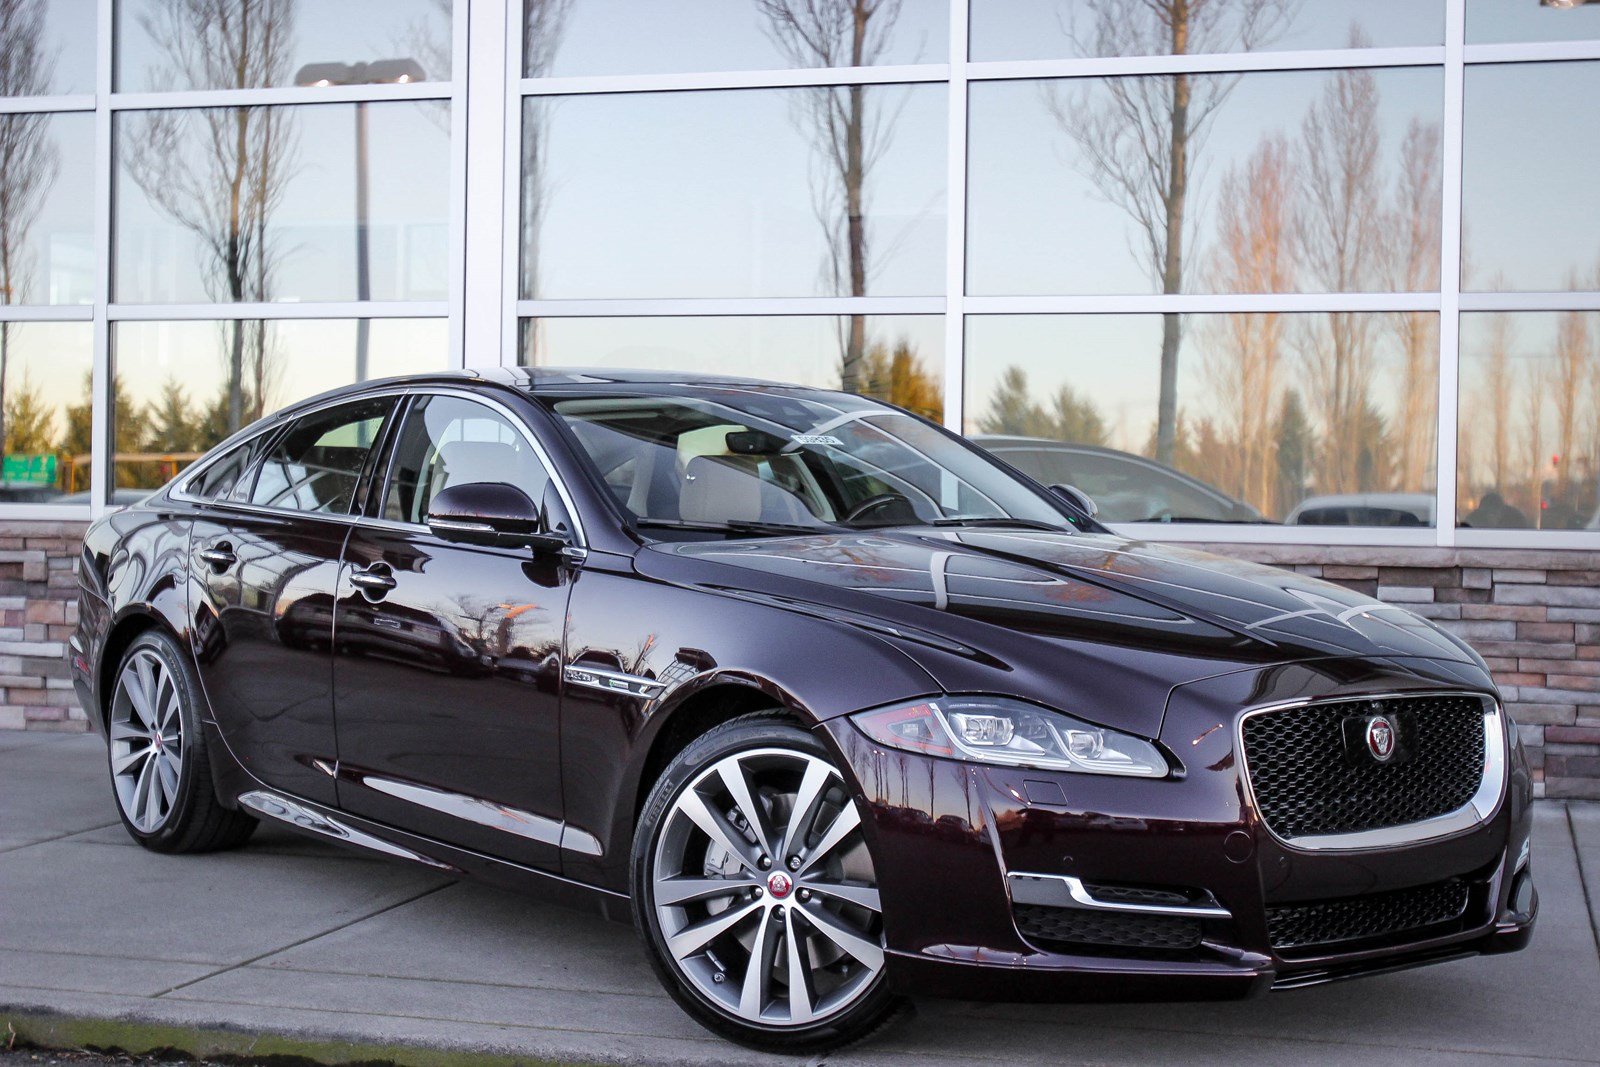 Jaguar to Celebrate 50 Years of Jaguar XJ with Historic Convoy